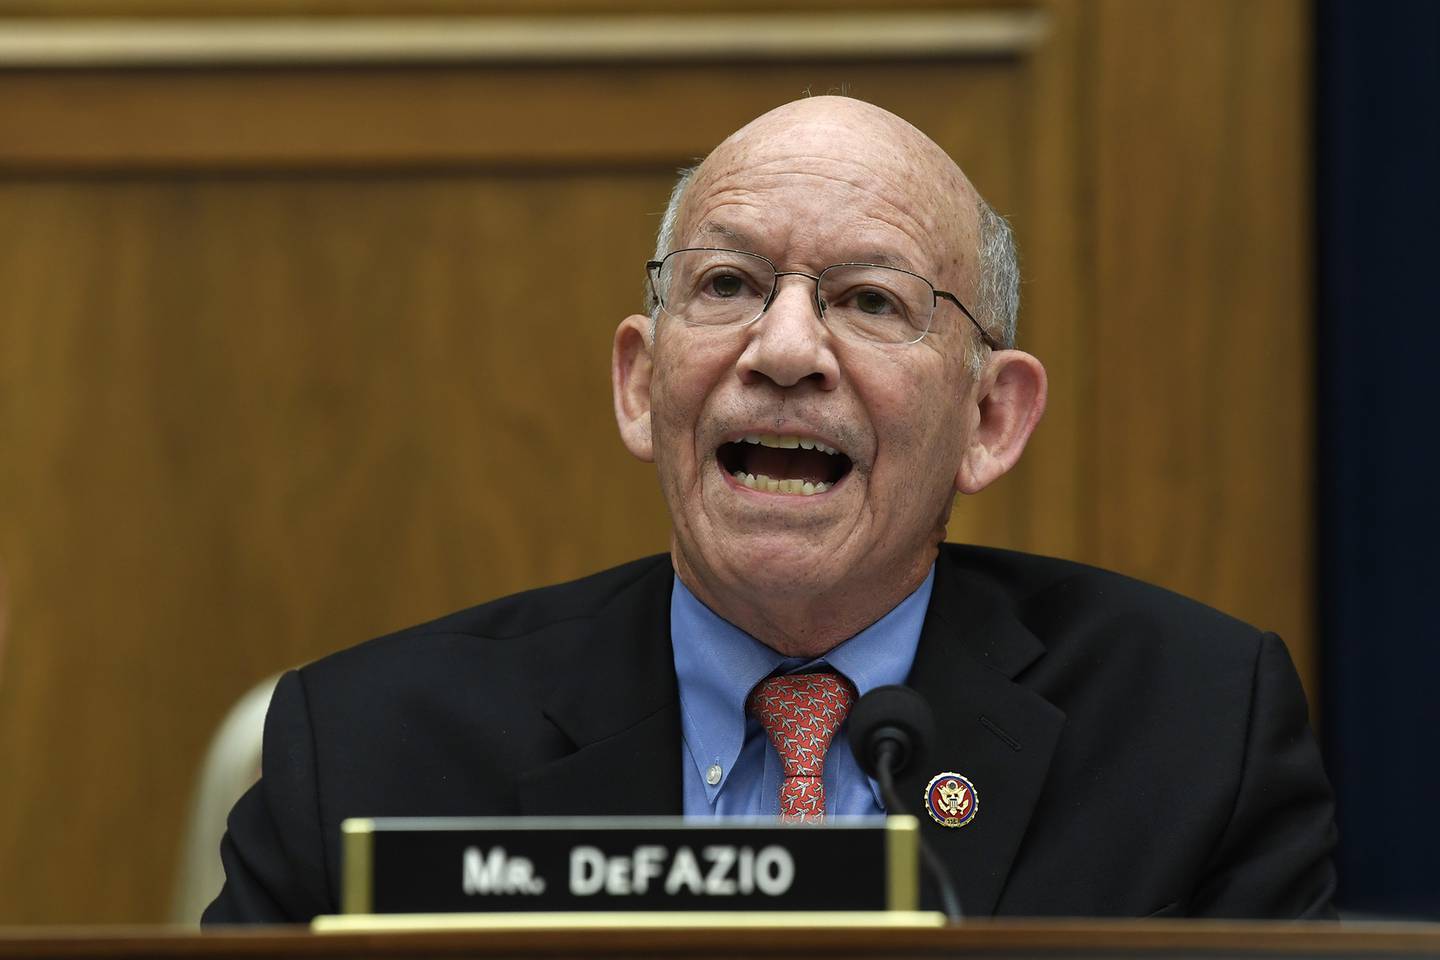 In this May 15, 2019. file photo, Rep. Peter DeFazio, D-Ore., speaks during a House Transportation Committee hearing on Capitol Hill in Washington.